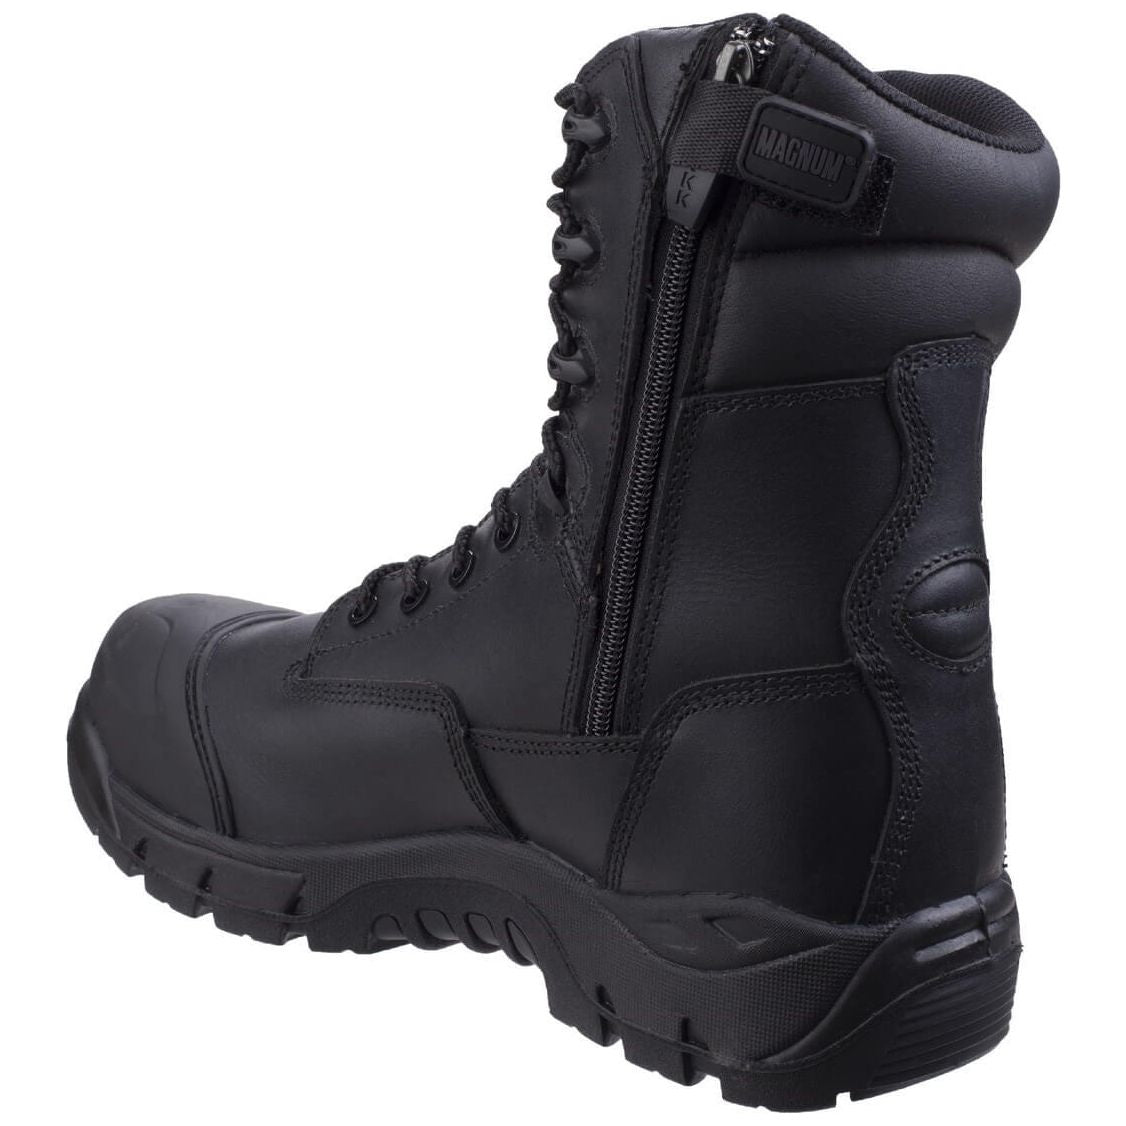 Magnum Rigmaster Safety Boots-Black-4